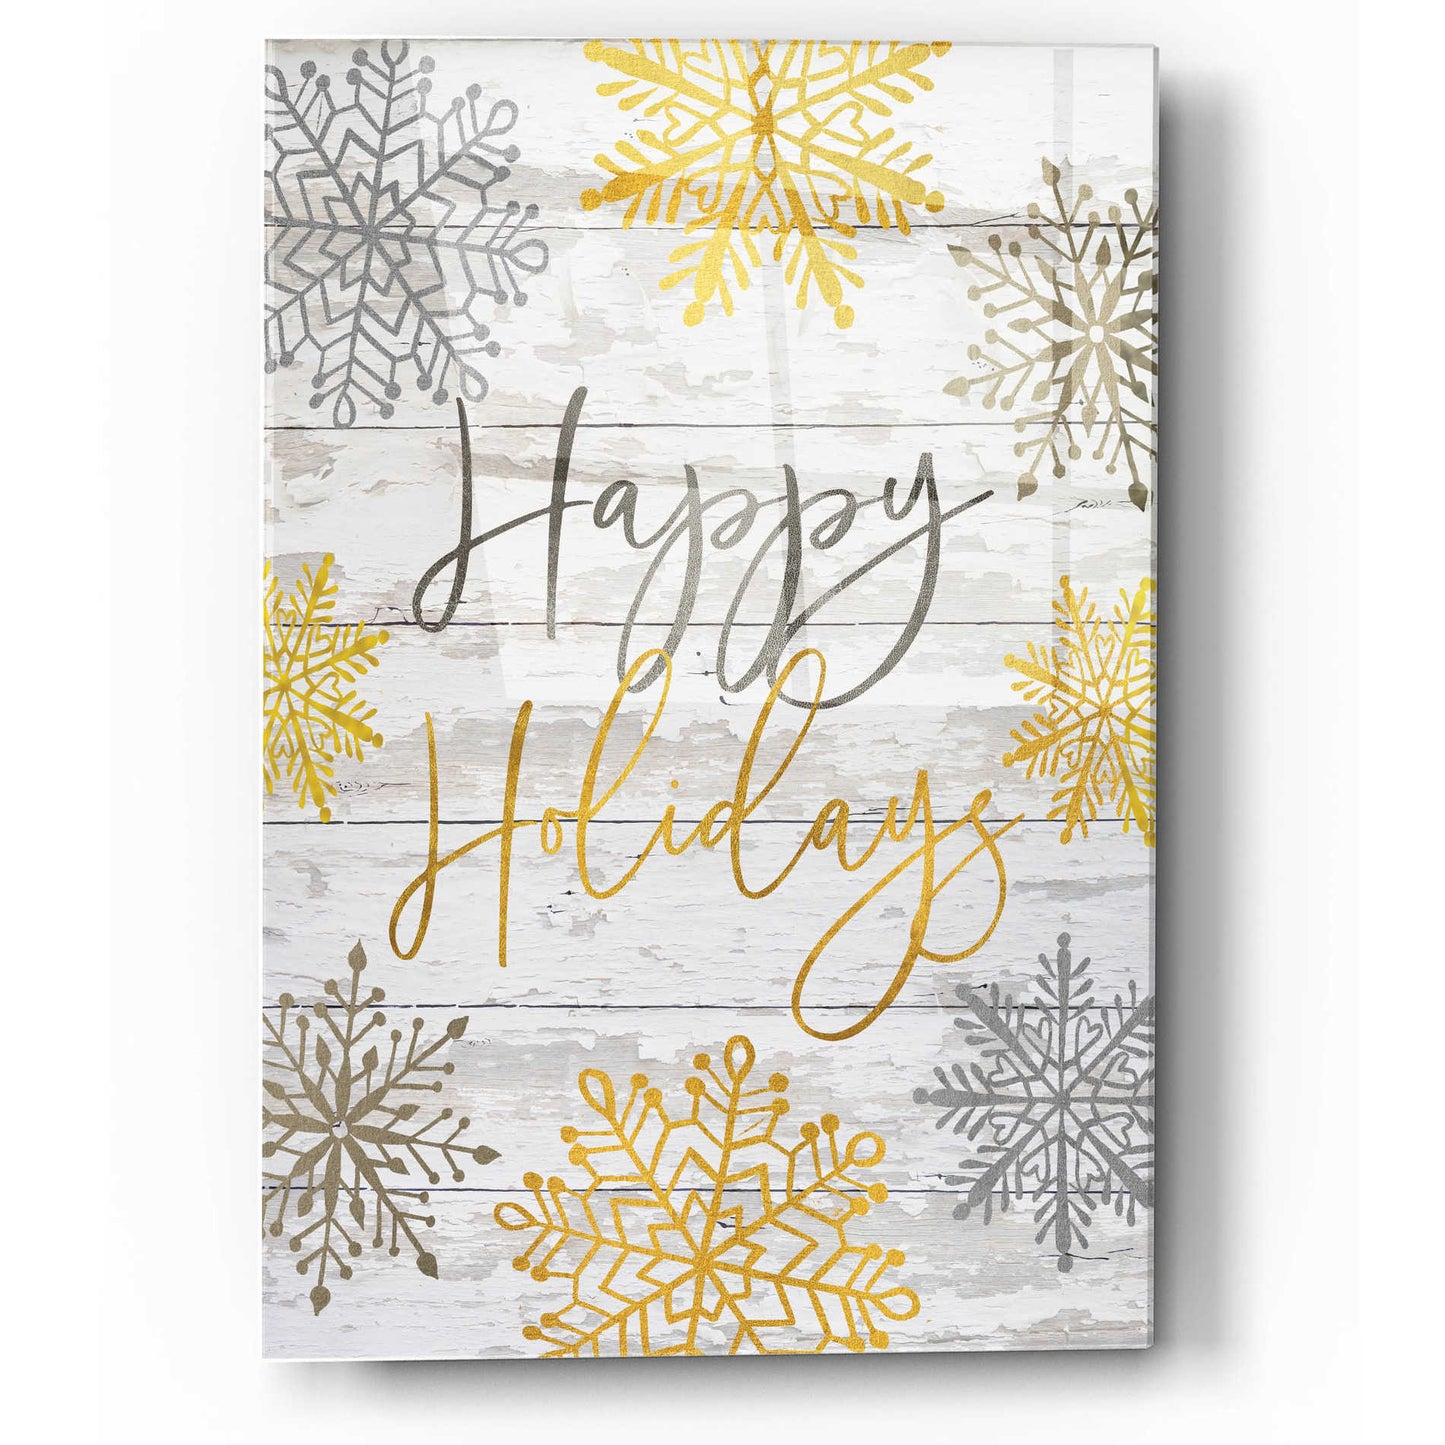 Epic Art 'Happy Holidays Snowflakes' by Cindy Jacobs, Acrylic Glass Wall Art,12x16